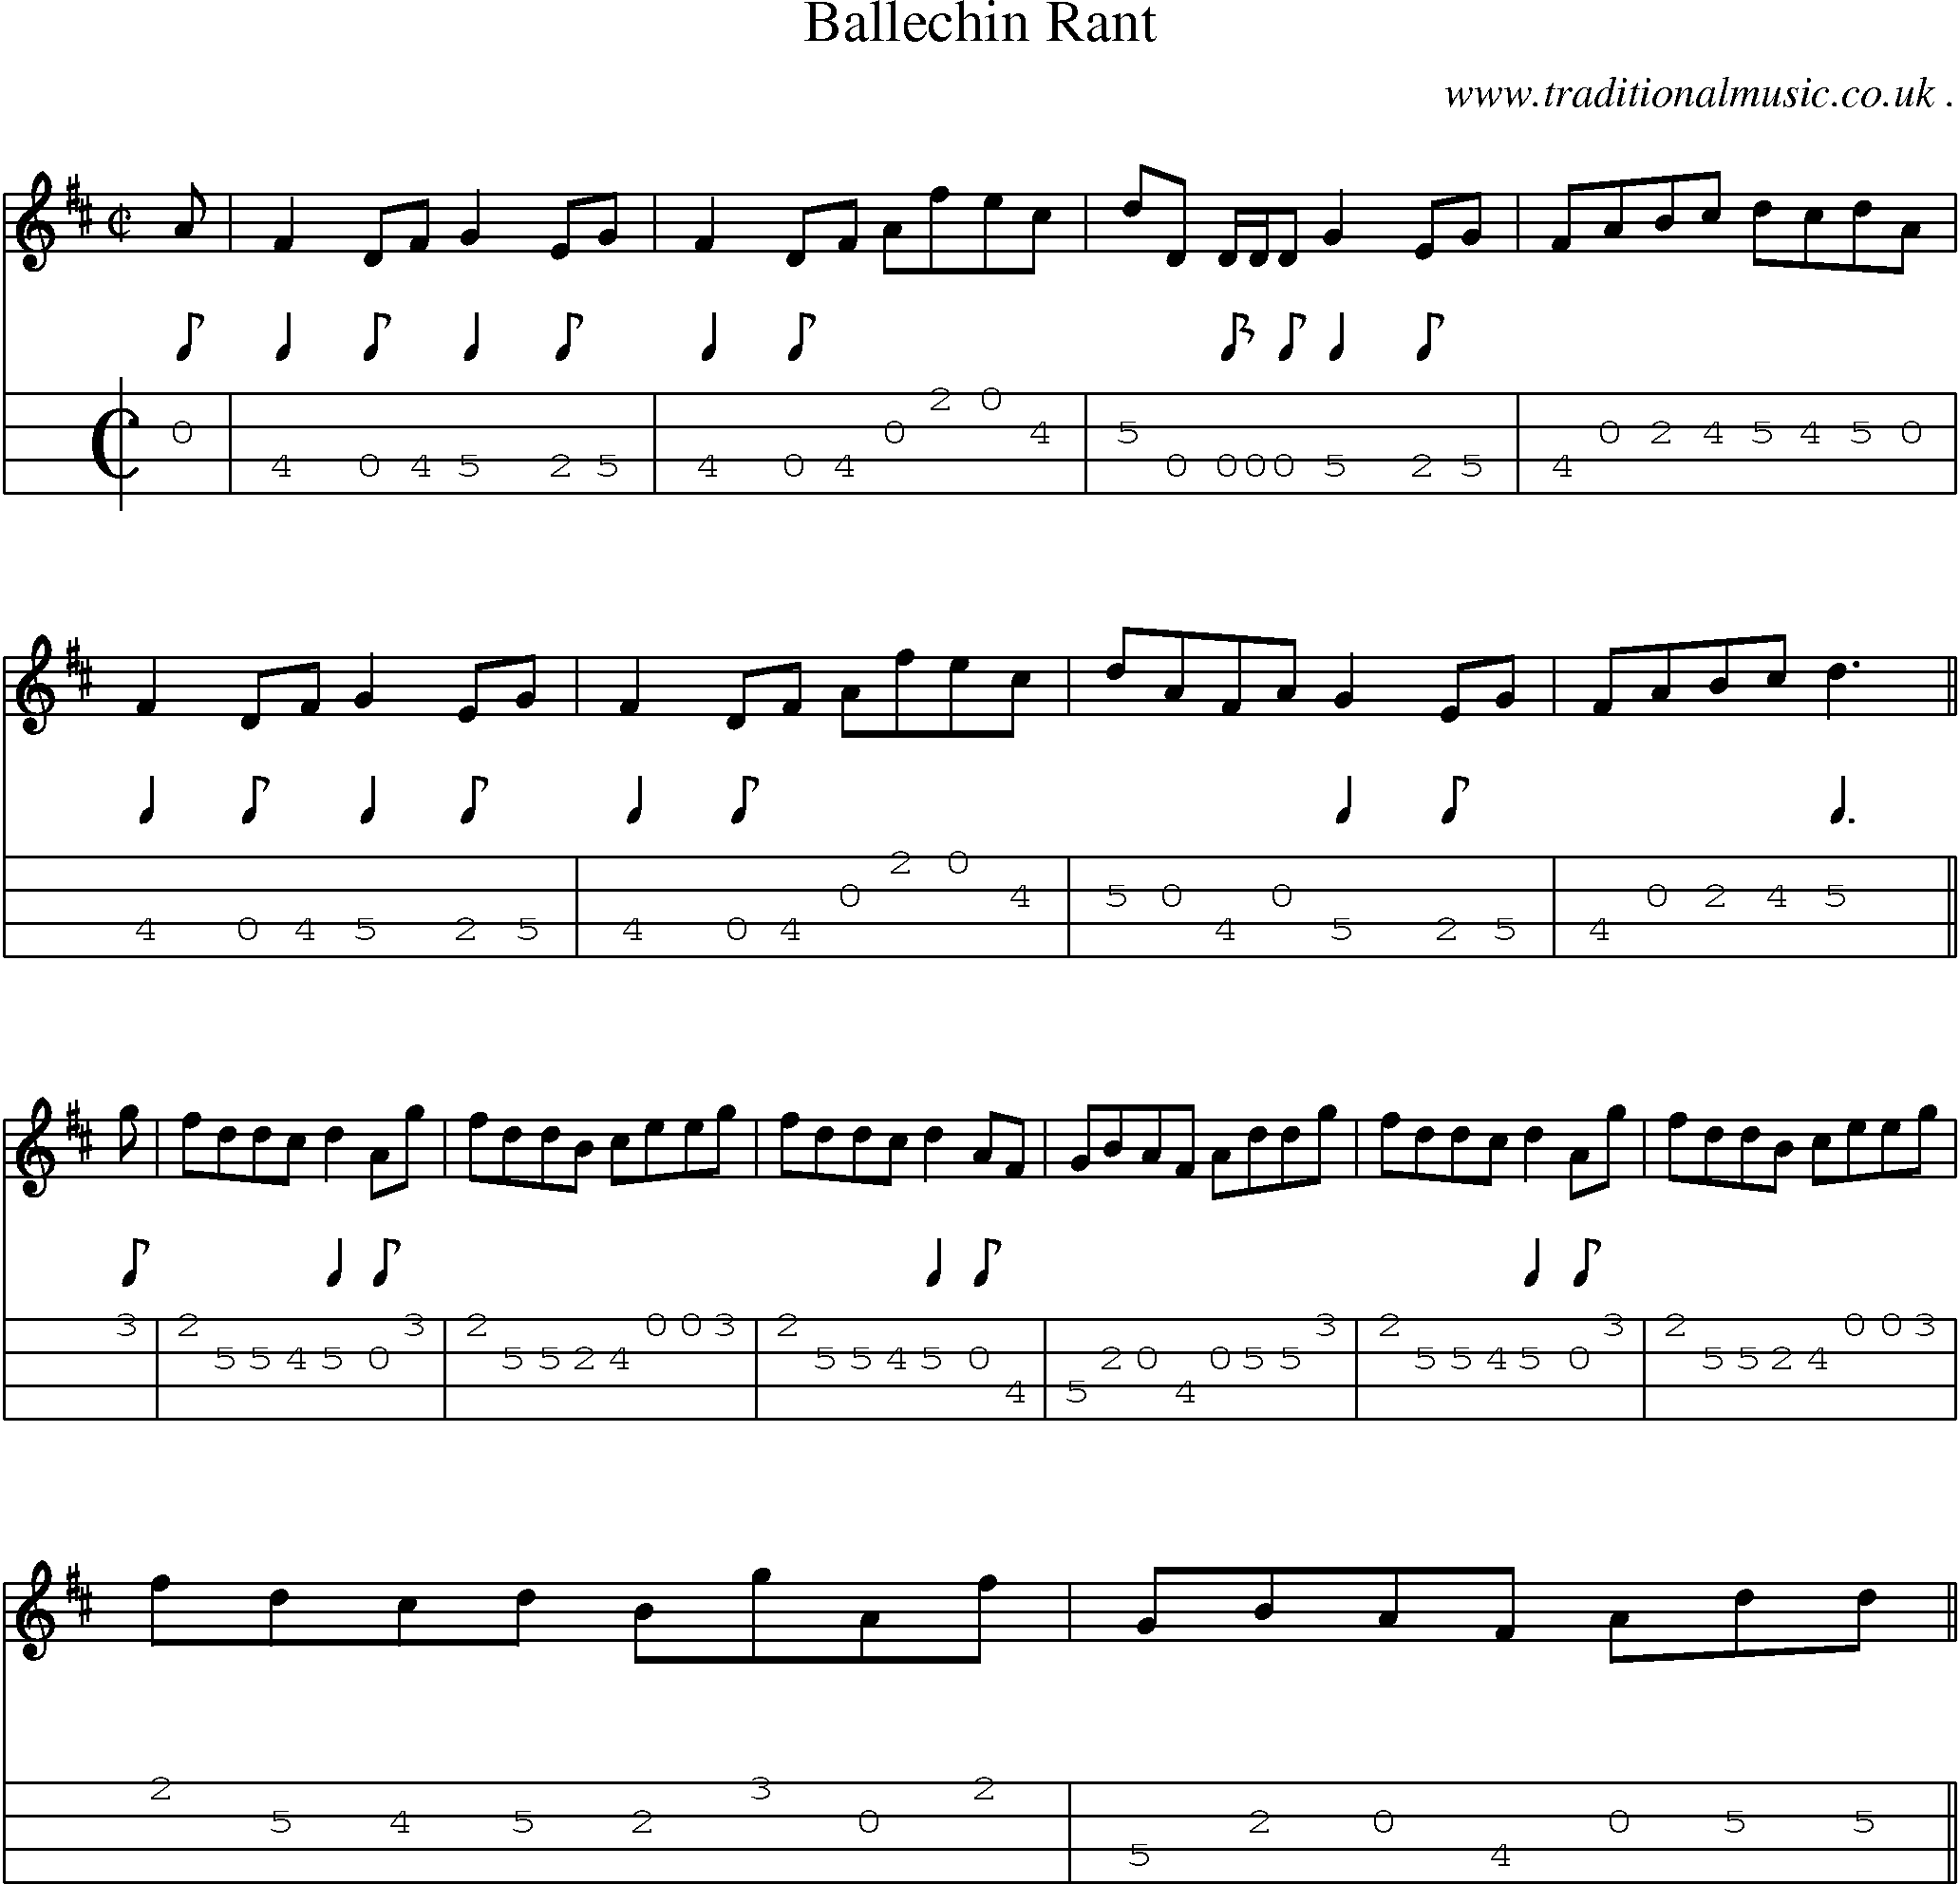 Sheet-music  score, Chords and Mandolin Tabs for Ballechin Rant